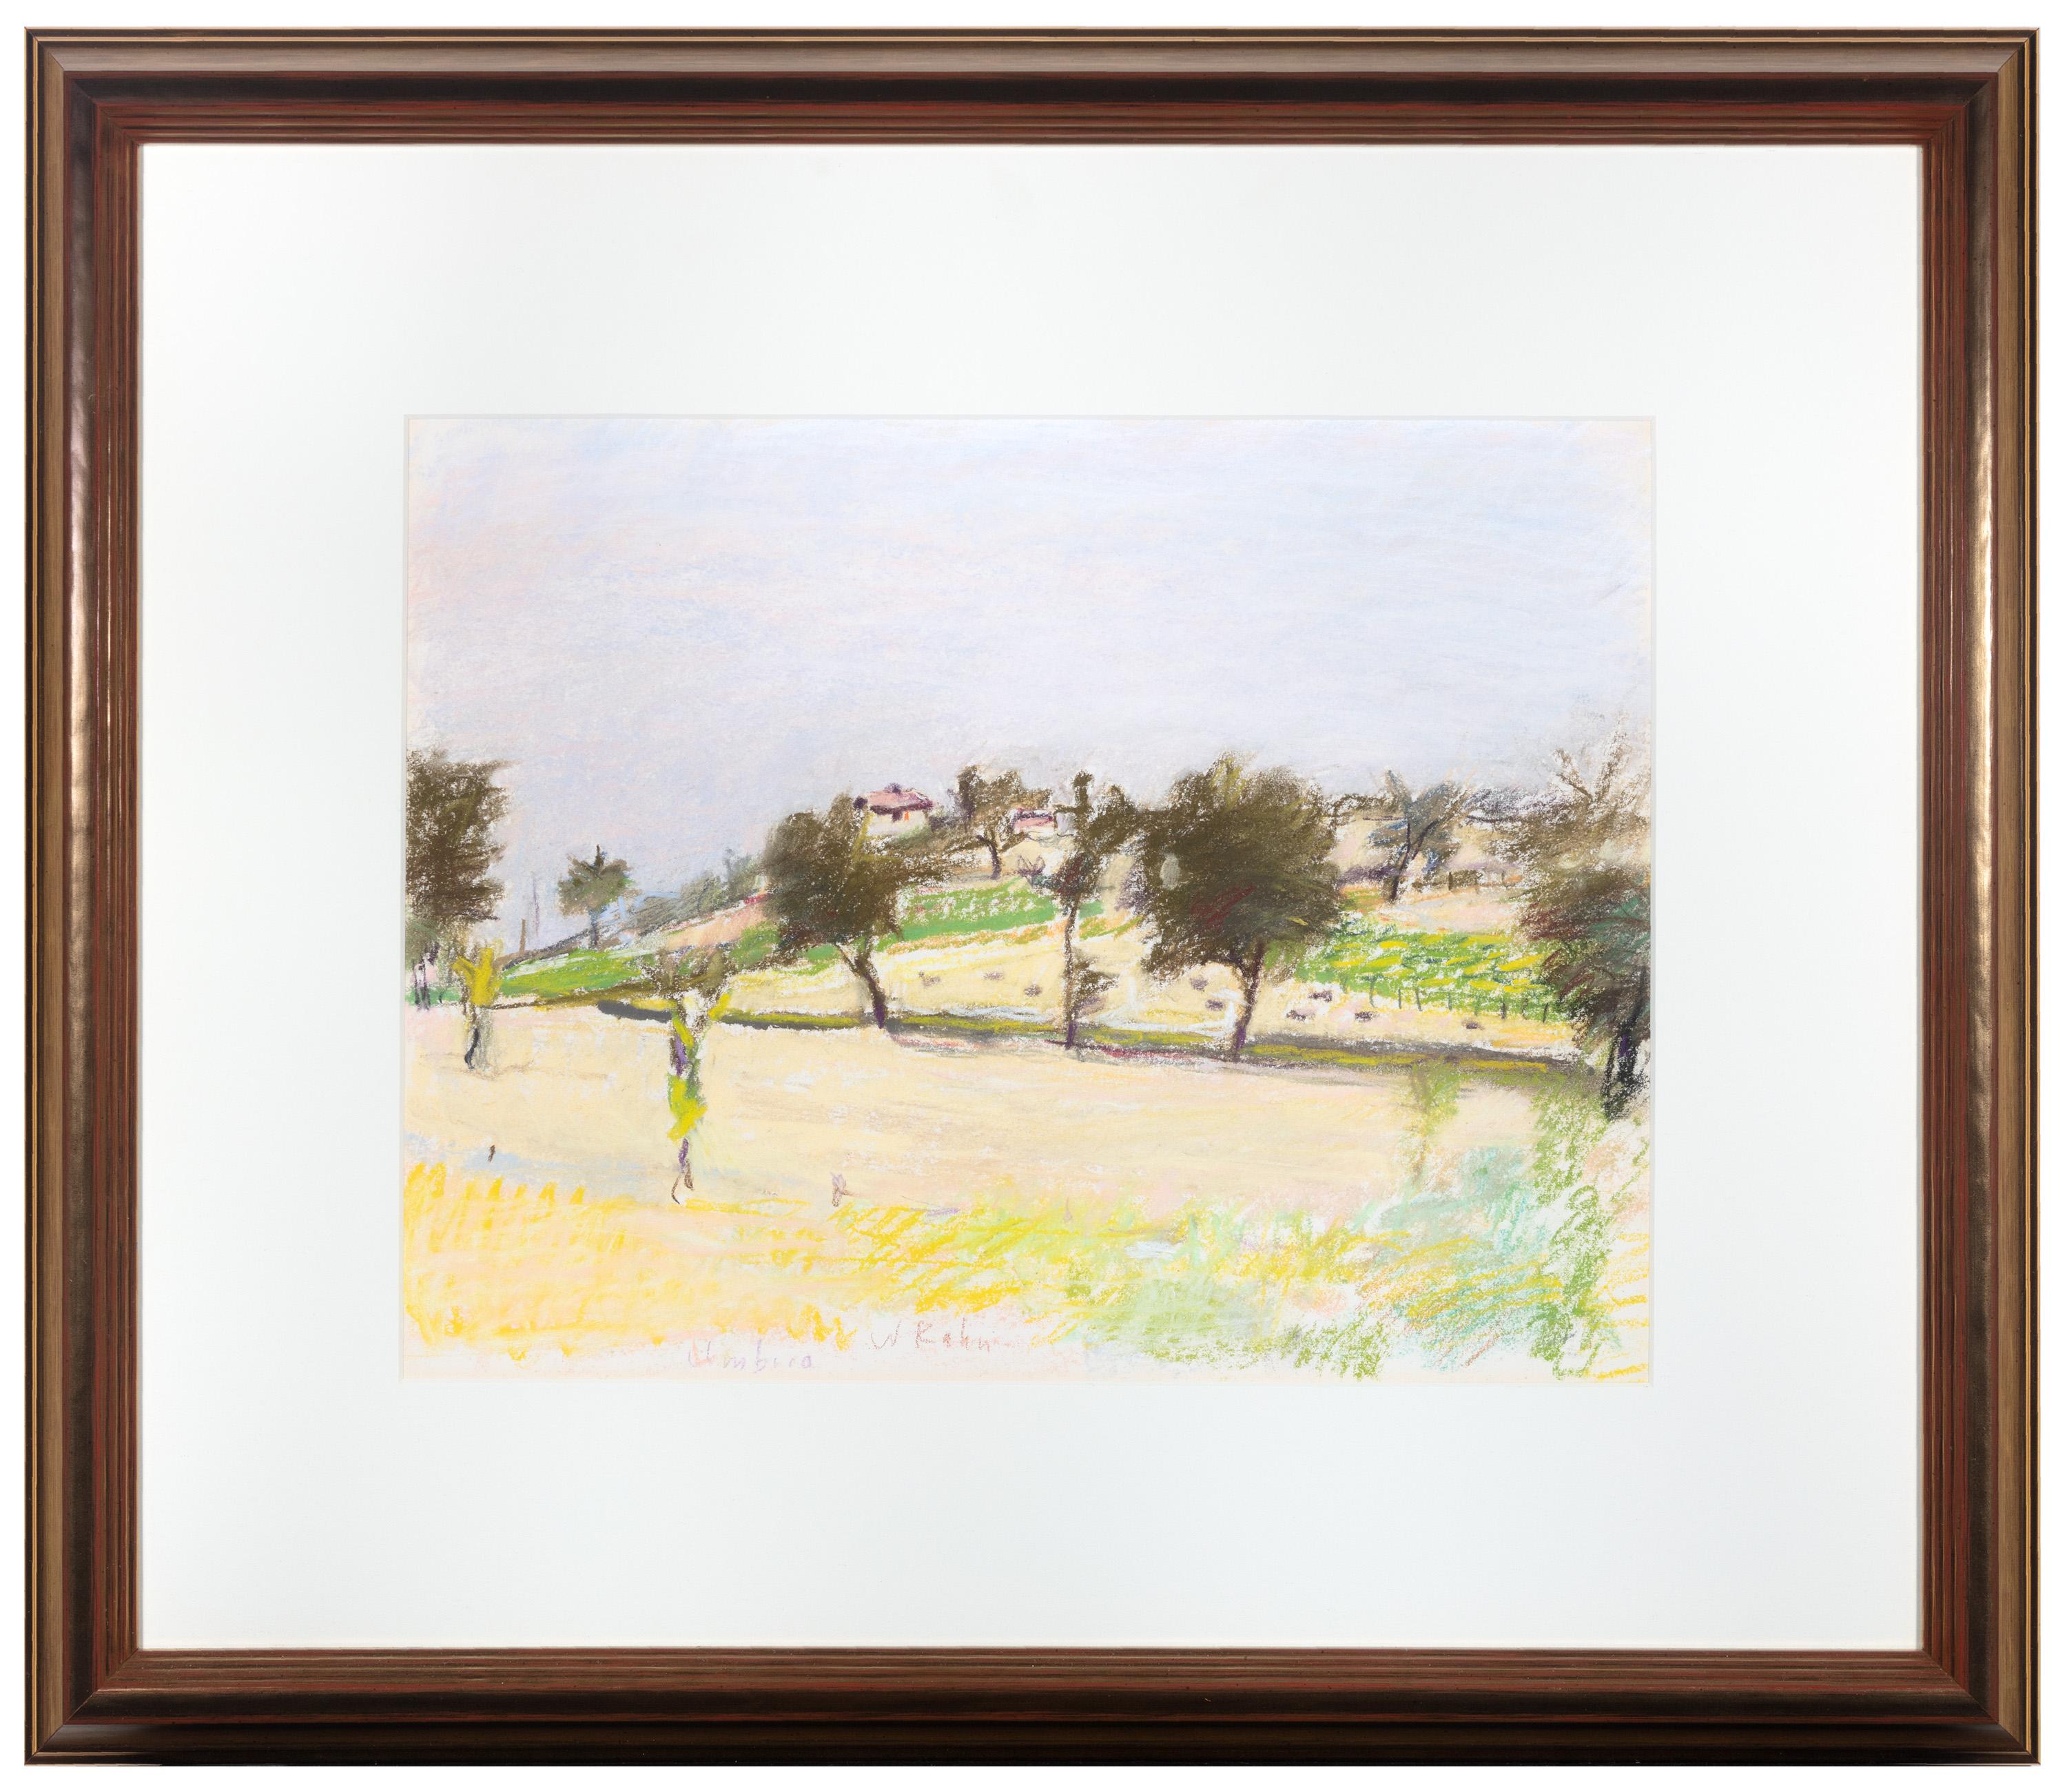 "Umbria" is a landscape pastel by American artist Wolf Kahn. Green hills and trees dominate the composition as a light blue sky evens it out almost exactly in the middle. Titled and signed on bottom center.

10 1/2" x 13 1/2" art
17 5/8" x 20 1/2"